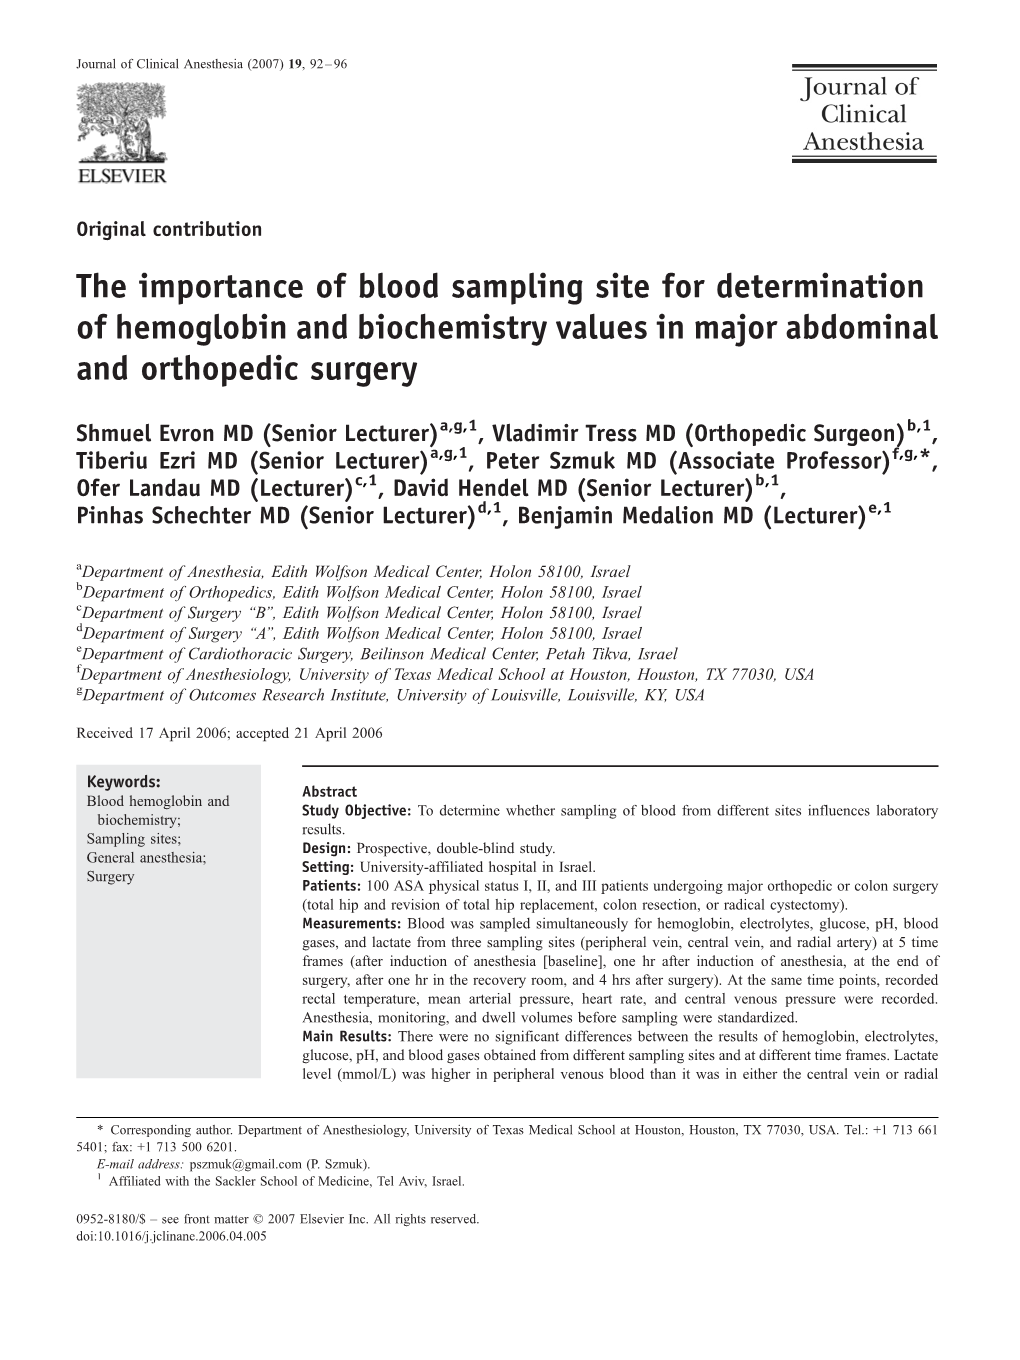 The Importance of Blood Sampling Site for Determination of Hemoglobin and Biochemistry Values in Major Abdominal and Orthopedic Surgery